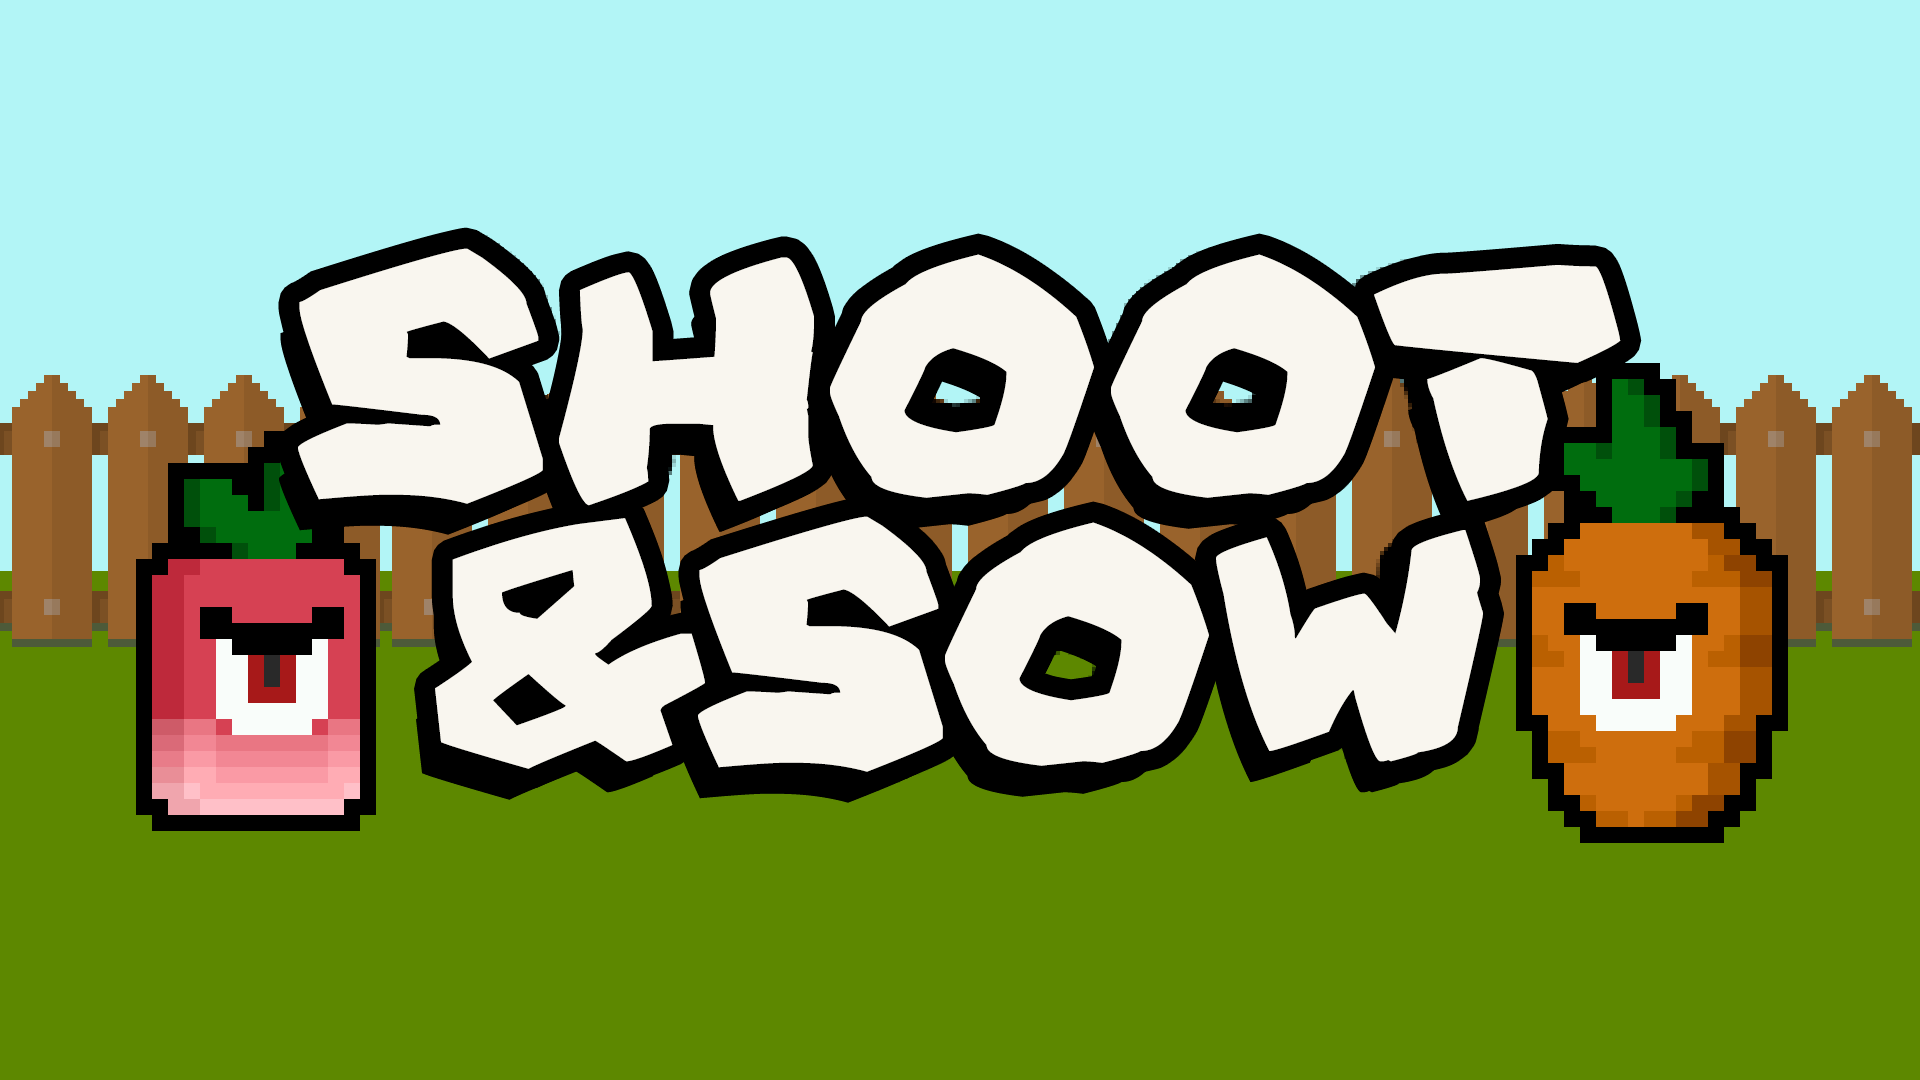 Shoot & Sow Game Image